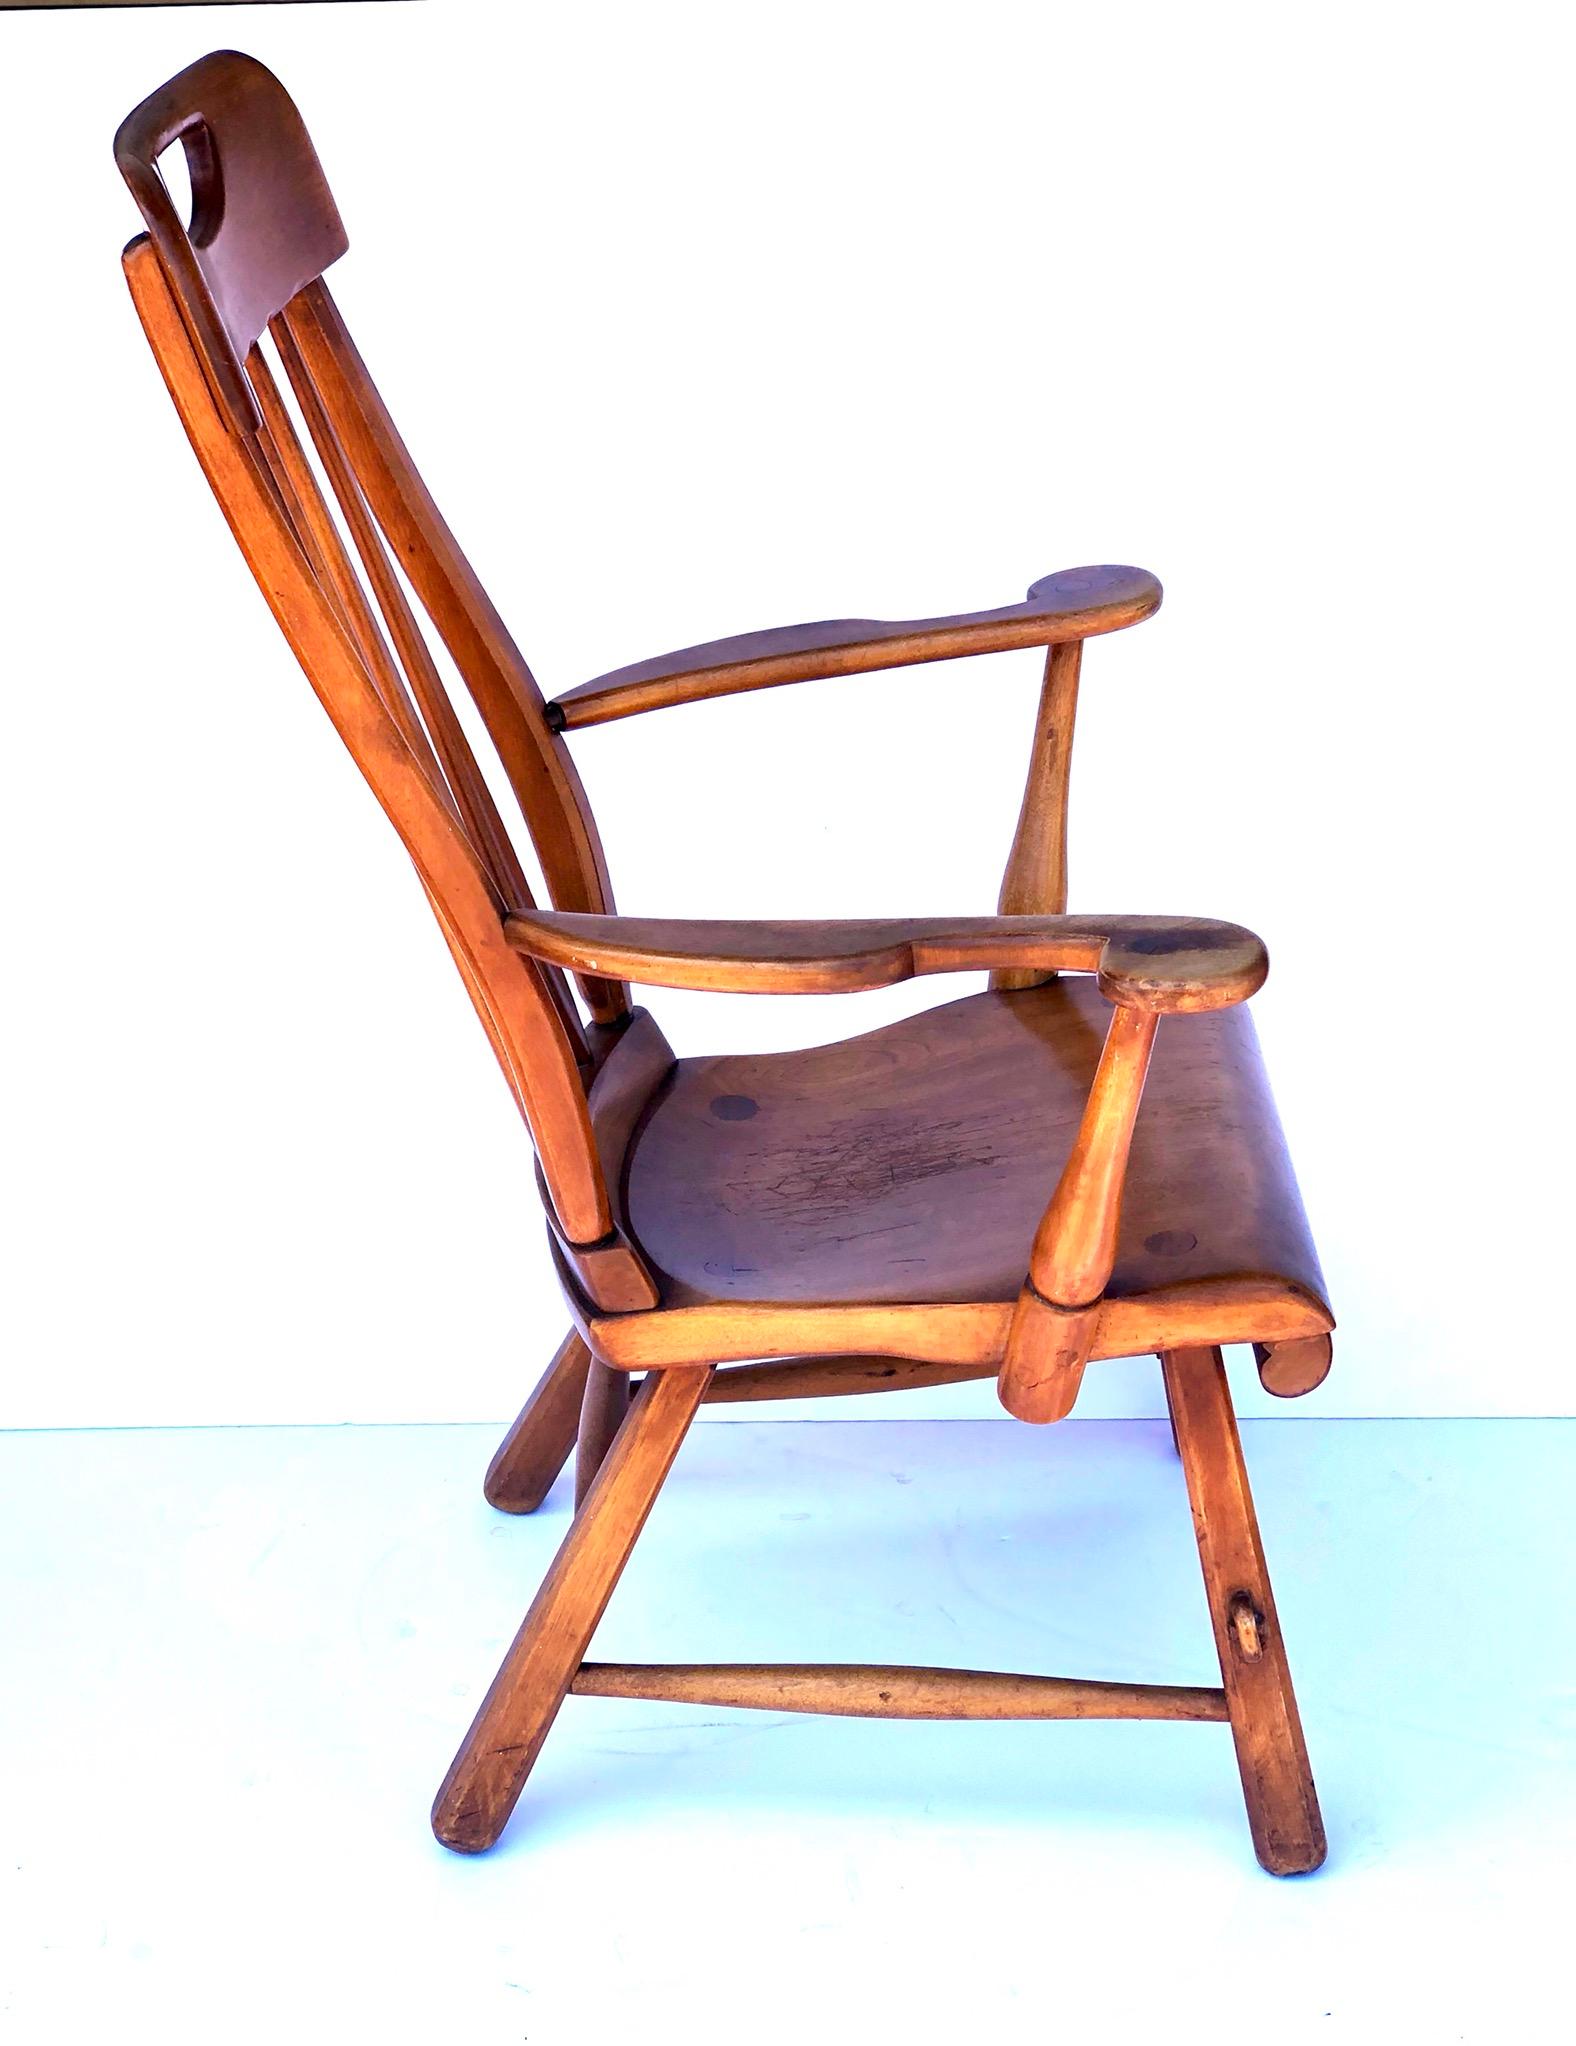 A Craftsman armchair by Herman de Vries in solid maplewood; hand-hewn spindles, shaped seat on splayed squared legs. Crafted in the 1930s. Original condition shows some wear and scratches on the seat as shown on the picture. Its solid and sturdy.